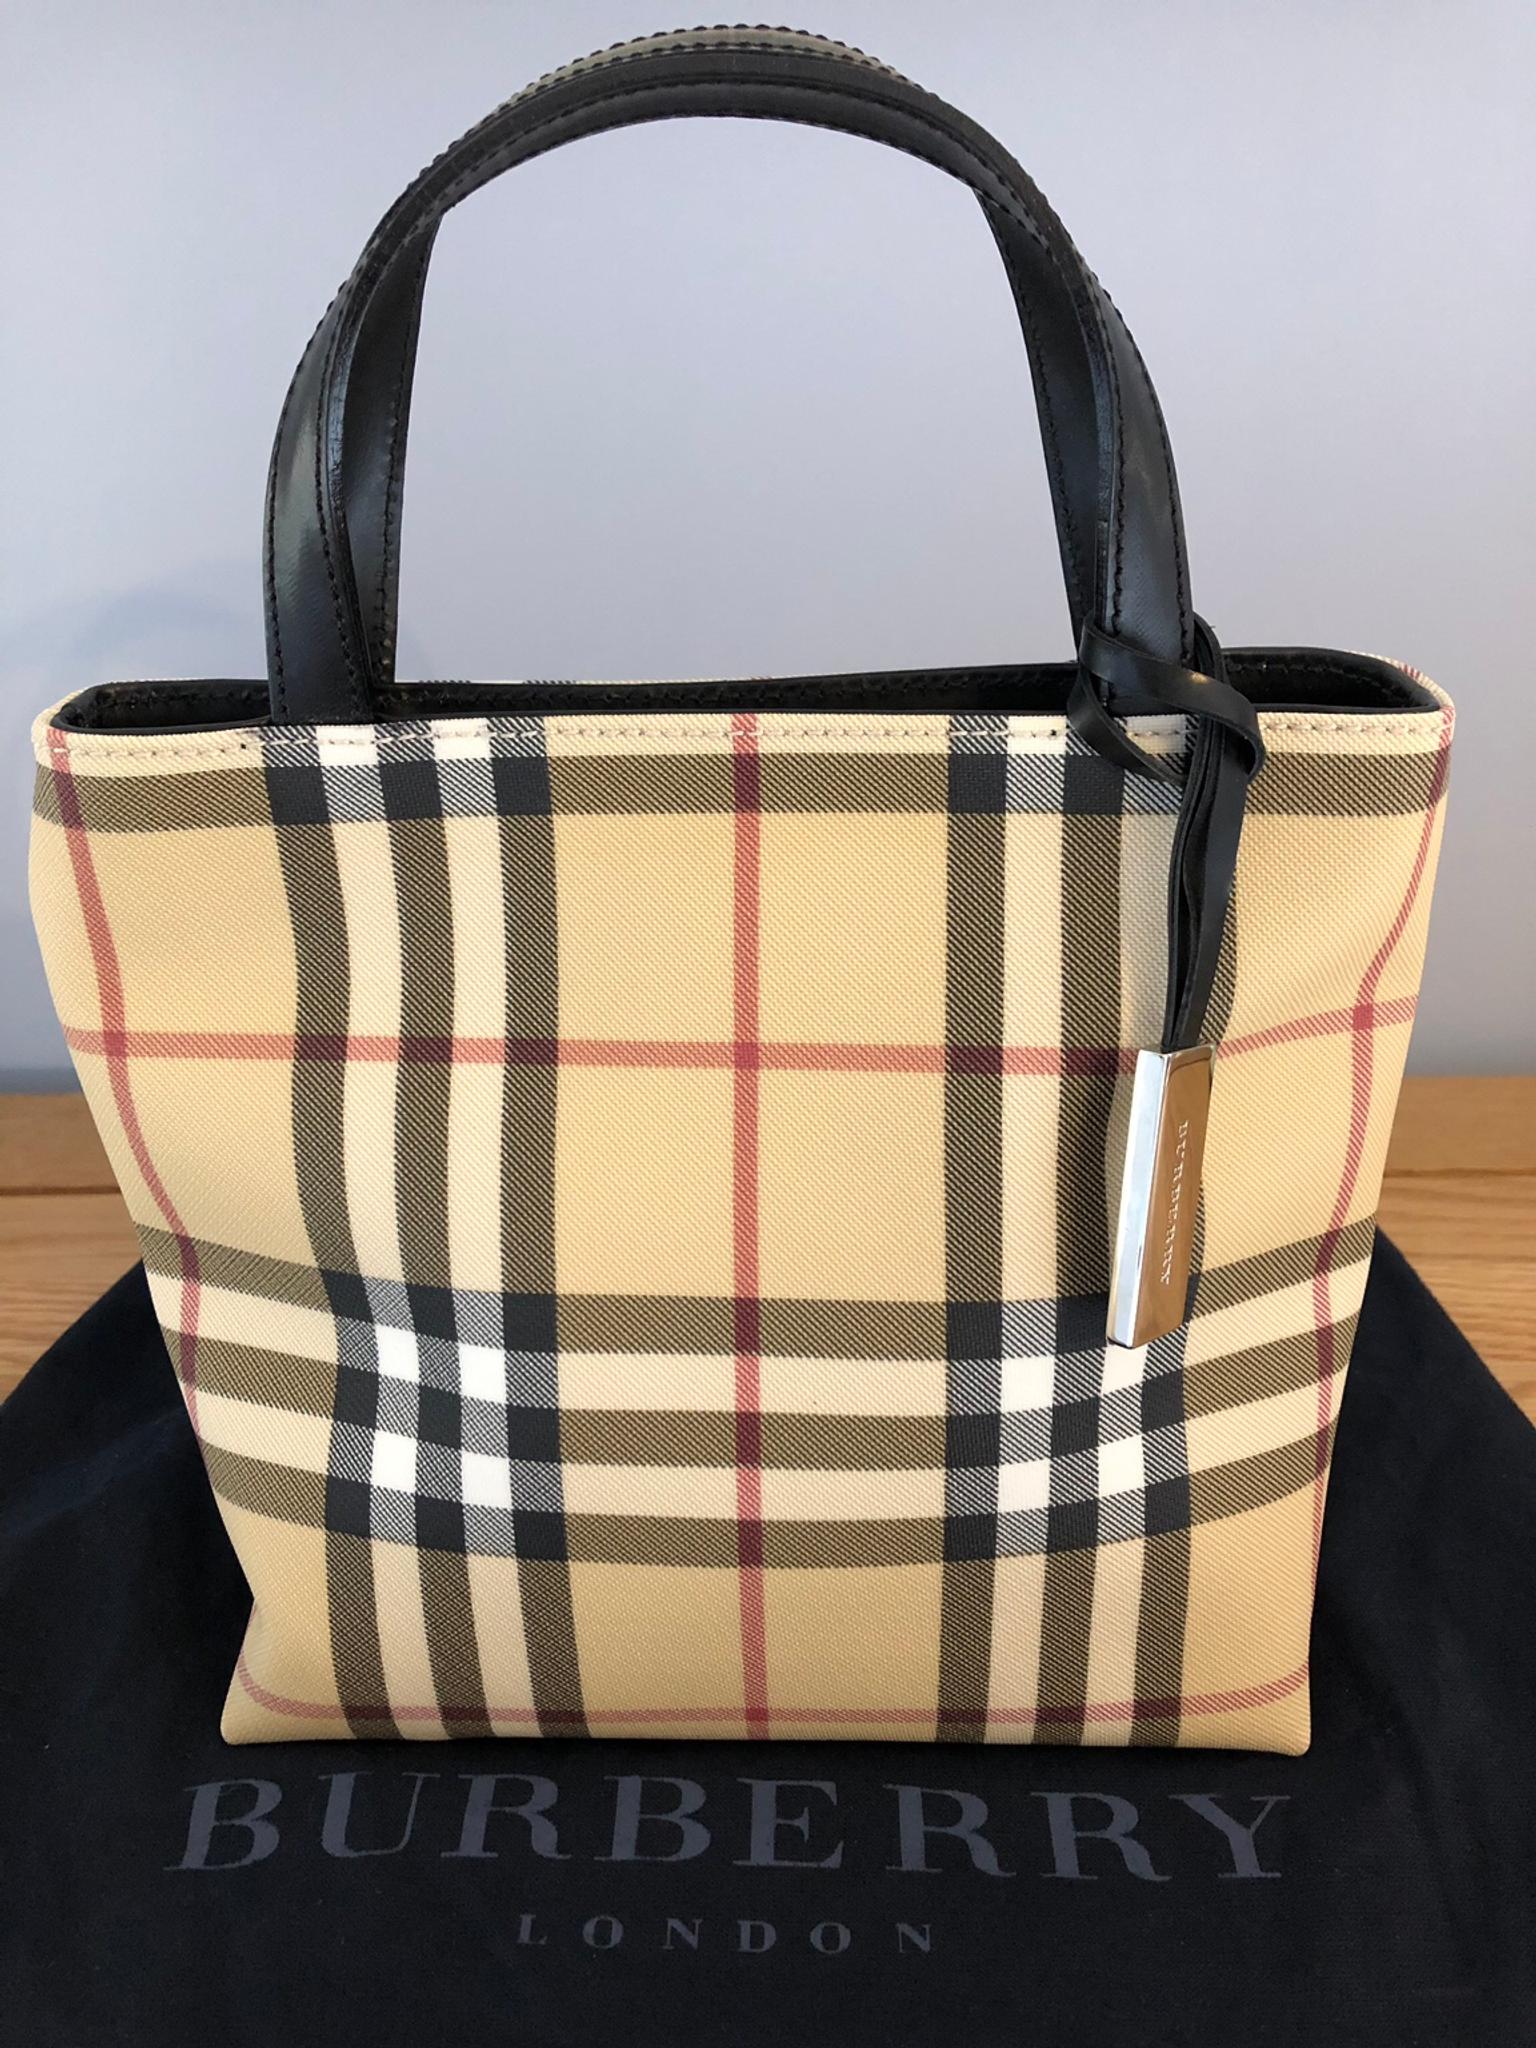 Burberry Small Tote Bag in NN10 Northamptonshire for £80.00 for sale ...